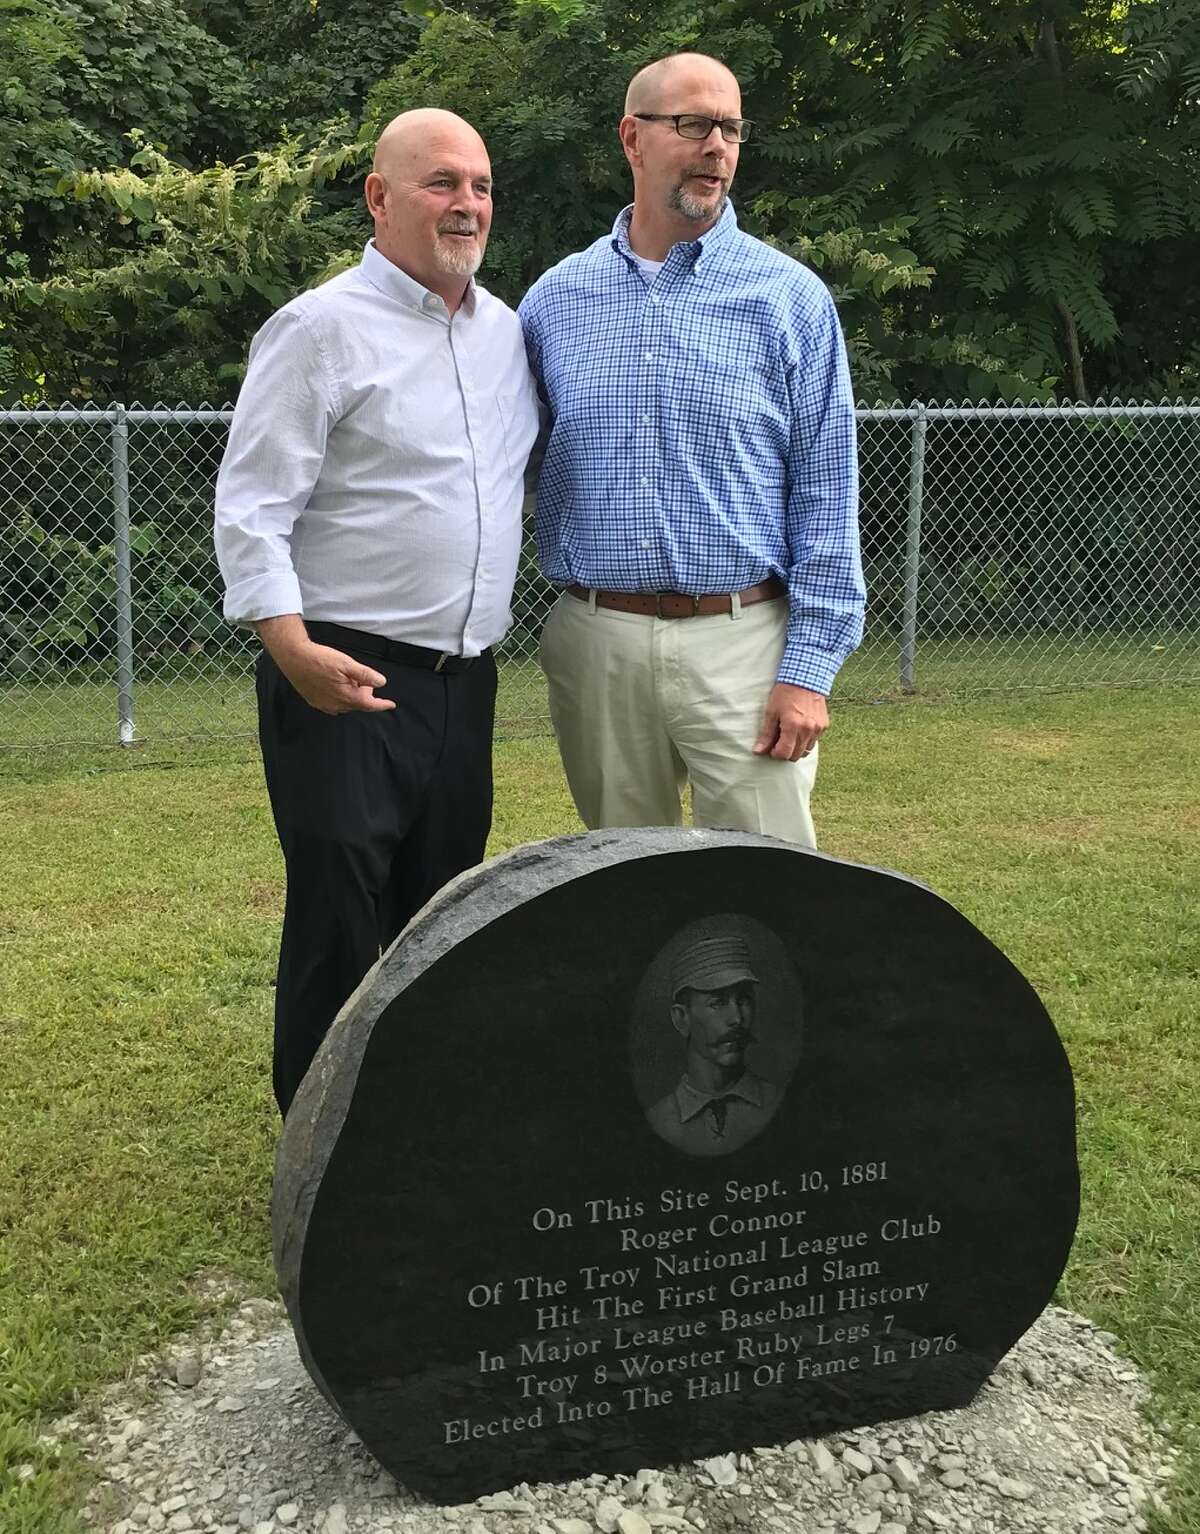 Rensselaer Mayor Rich Mooney, right, and councilman Bryan Leahey savored the moment of unveiling the Roger Connor monument 138 years to the day after the slugger hit the first grand slam in Major League Baseball history (Paul Grondahl / Times Union)